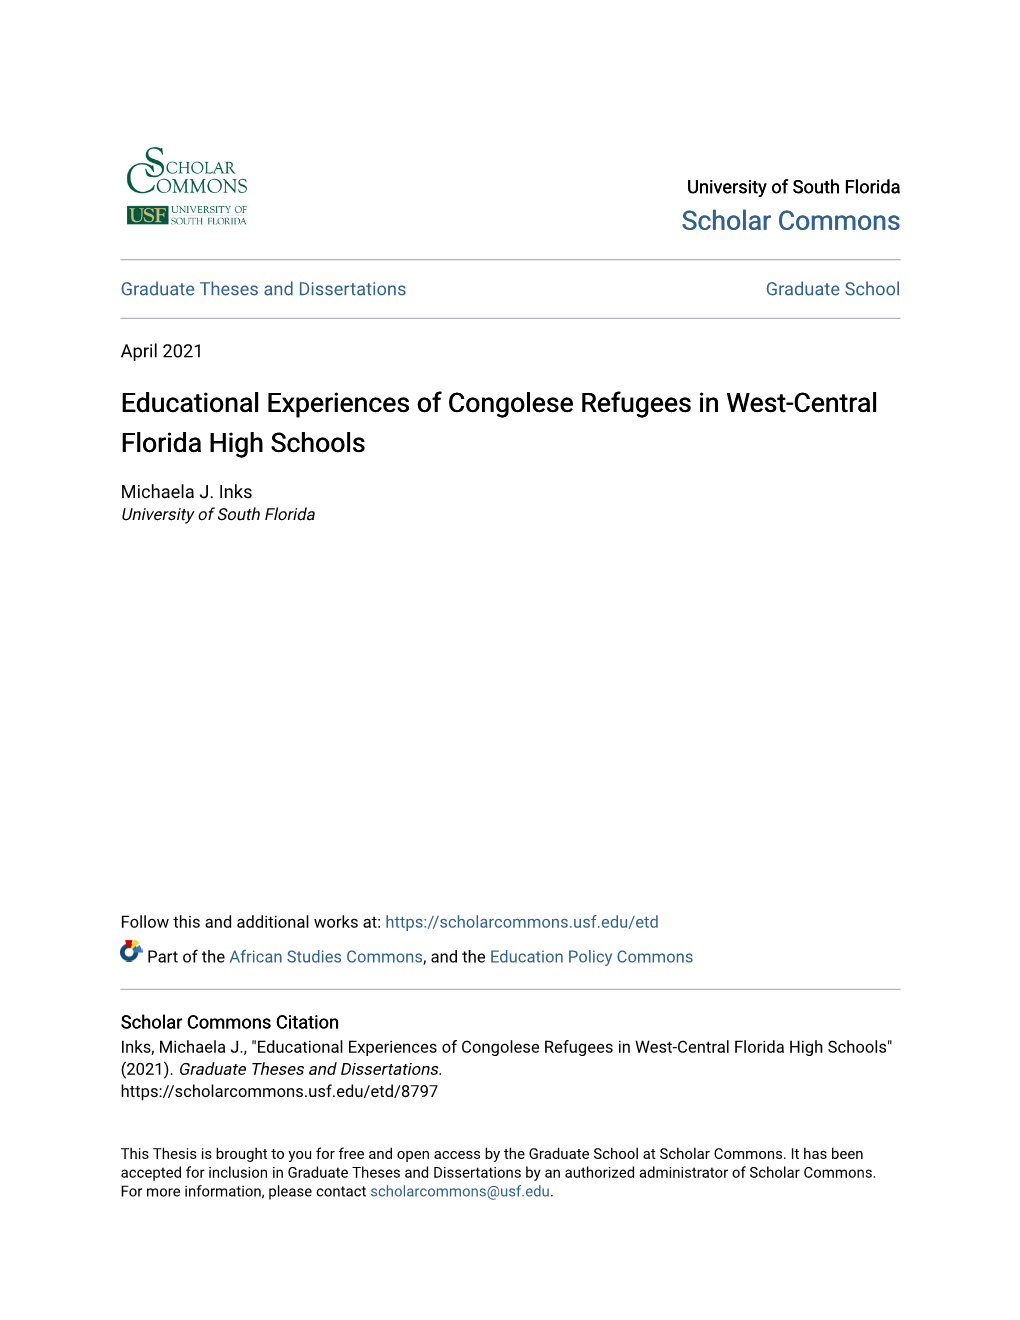 Educational Experiences of Congolese Refugees in West-Central Florida High Schools